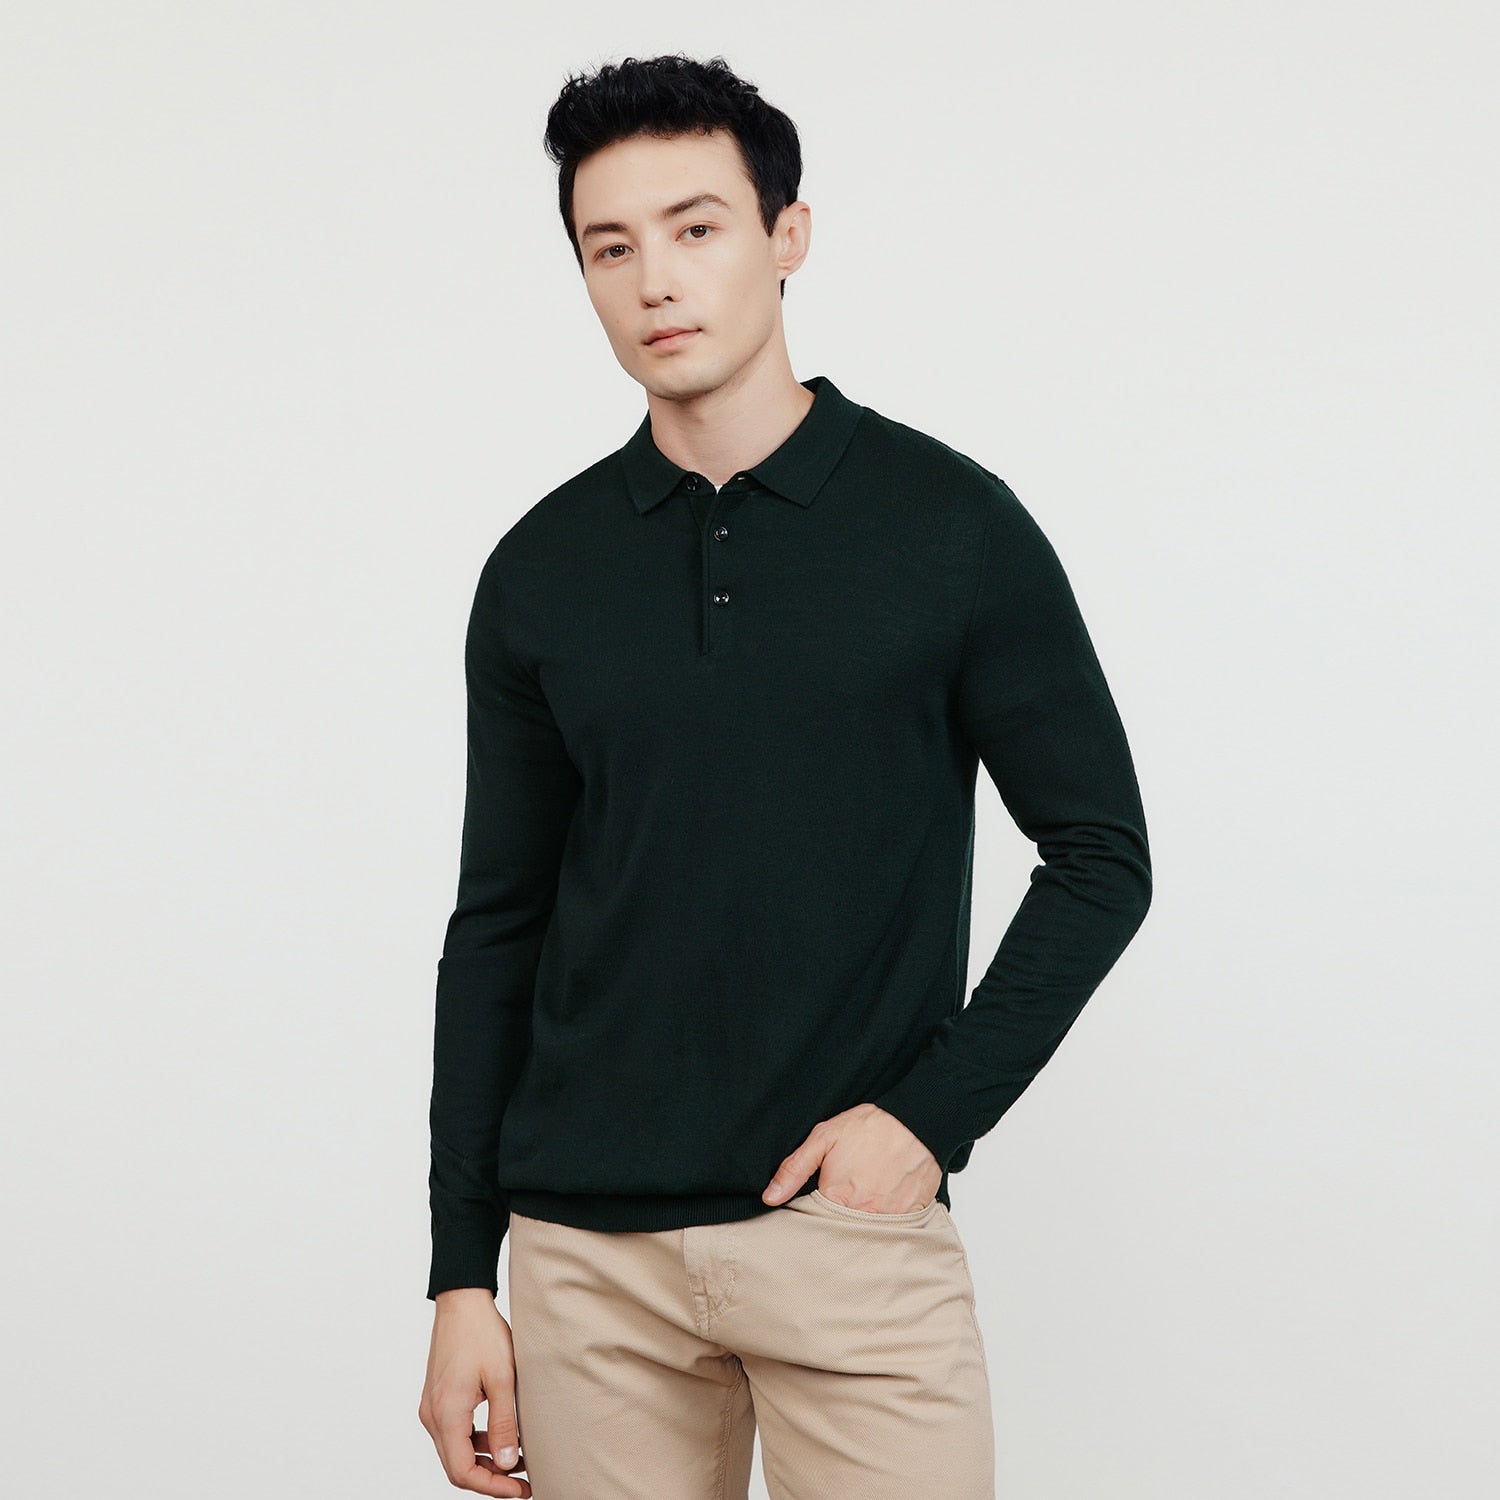 KUEGOU  Autumn Winter New  Men Sweater Polo Shirt Collar Long Sleeves Pullovers Quality Slim Knitted Wool Blend Warm Top 721 - Bekro's ART